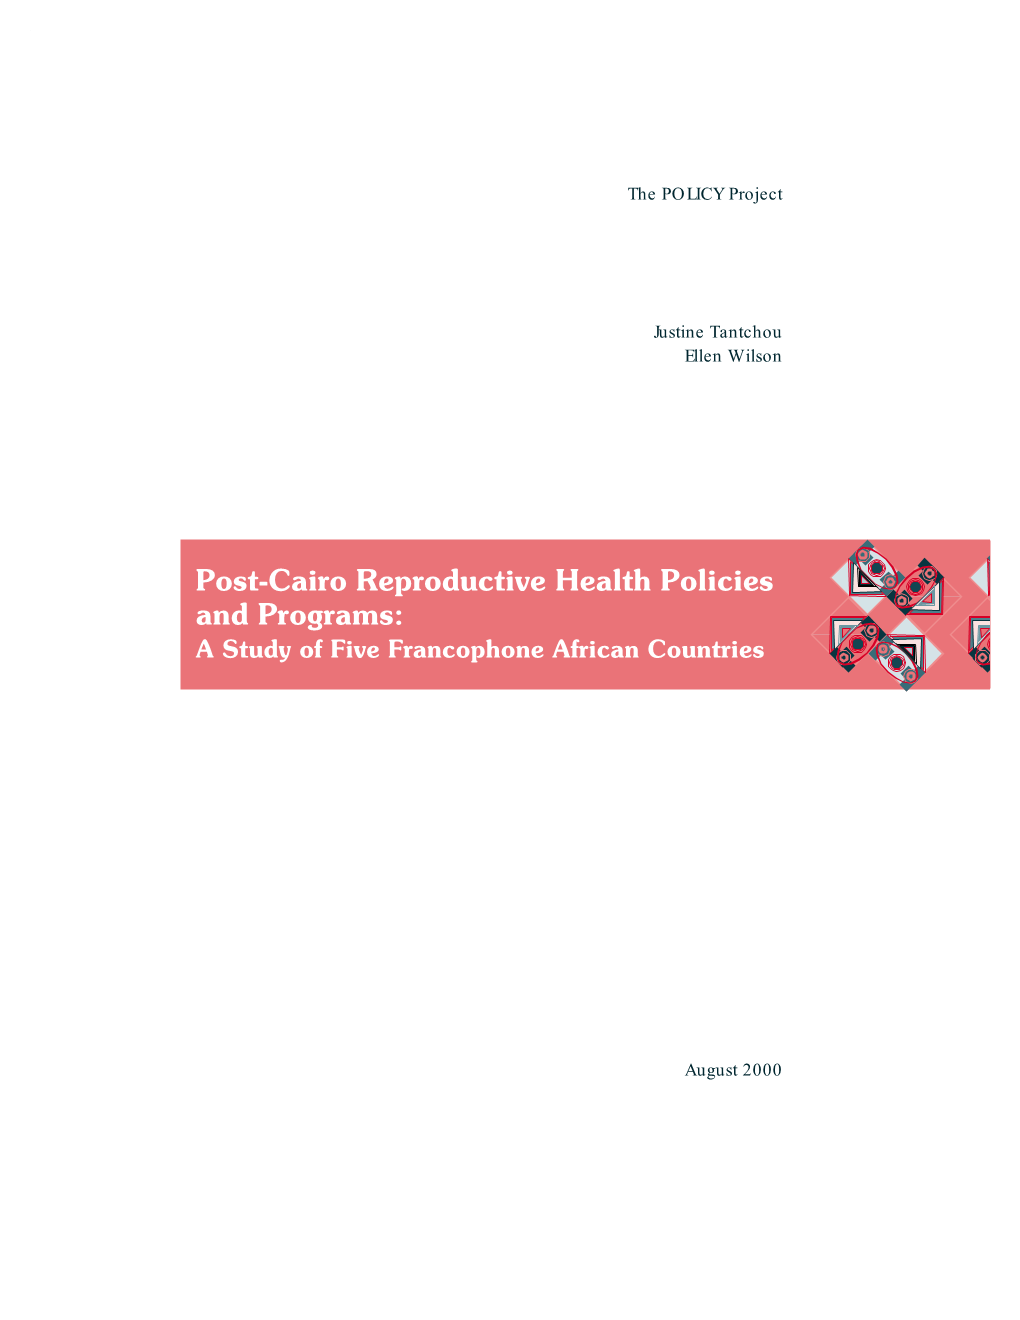 Post-Cairo Reproductive Health Policies and Programs: a Study of Five Francophone African Countries